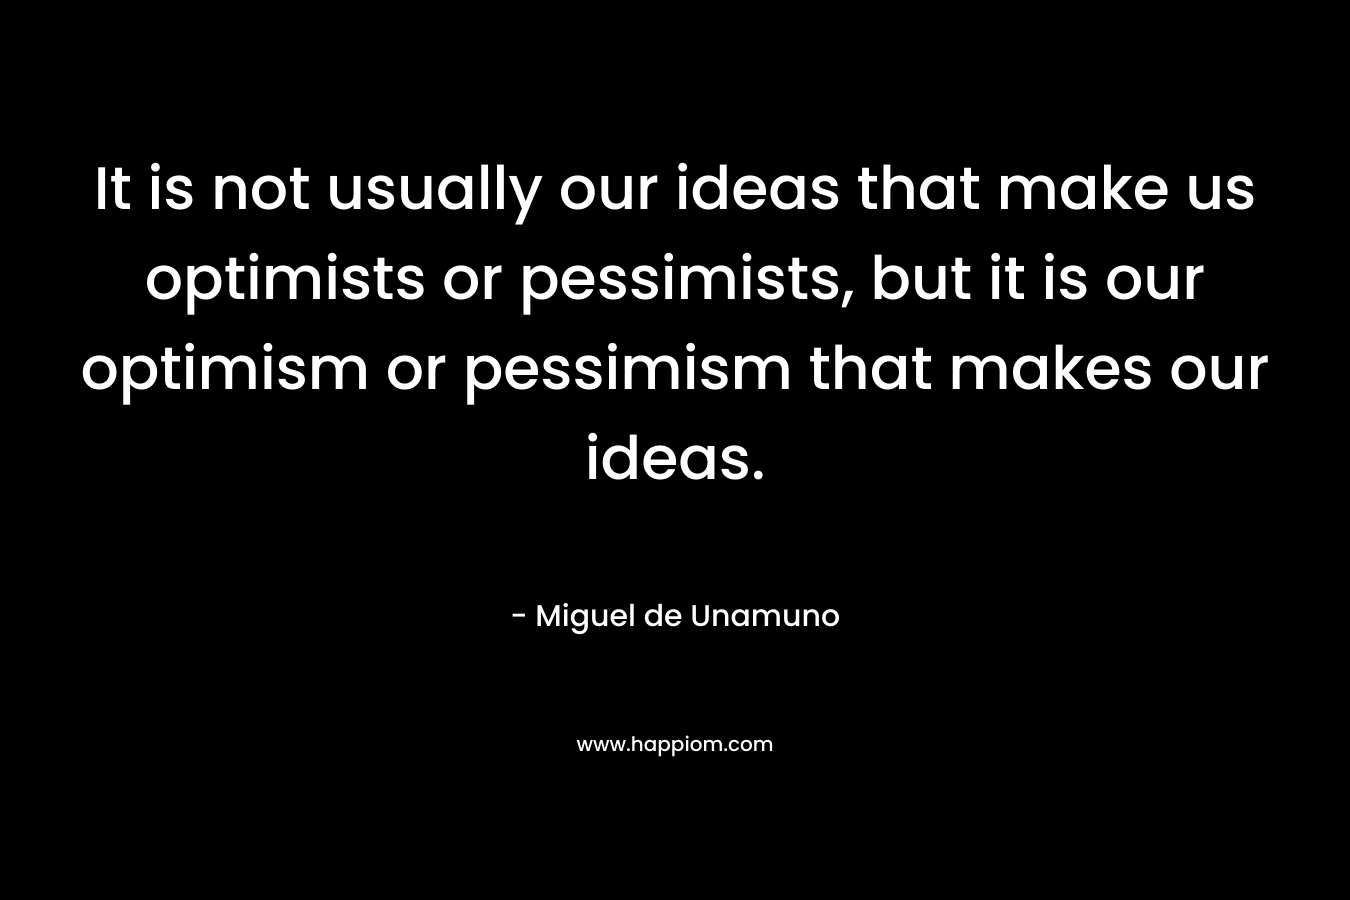 It is not usually our ideas that make us optimists or pessimists, but it is our optimism or pessimism that makes our ideas.